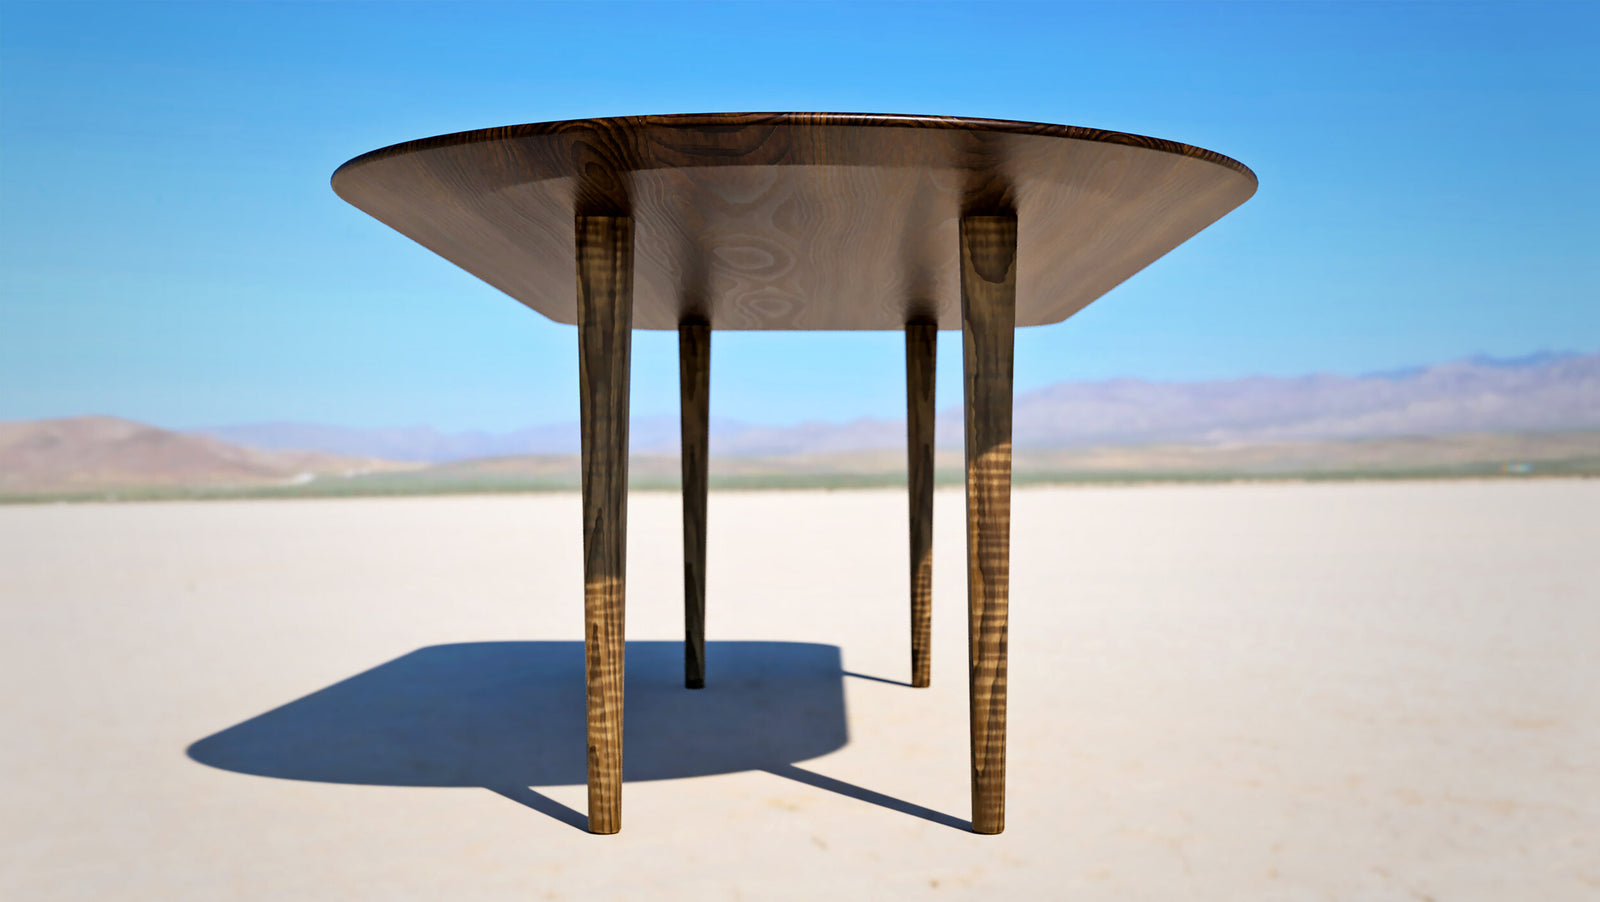 Learning Fusion 360 [#2] Modeling a Dining Table